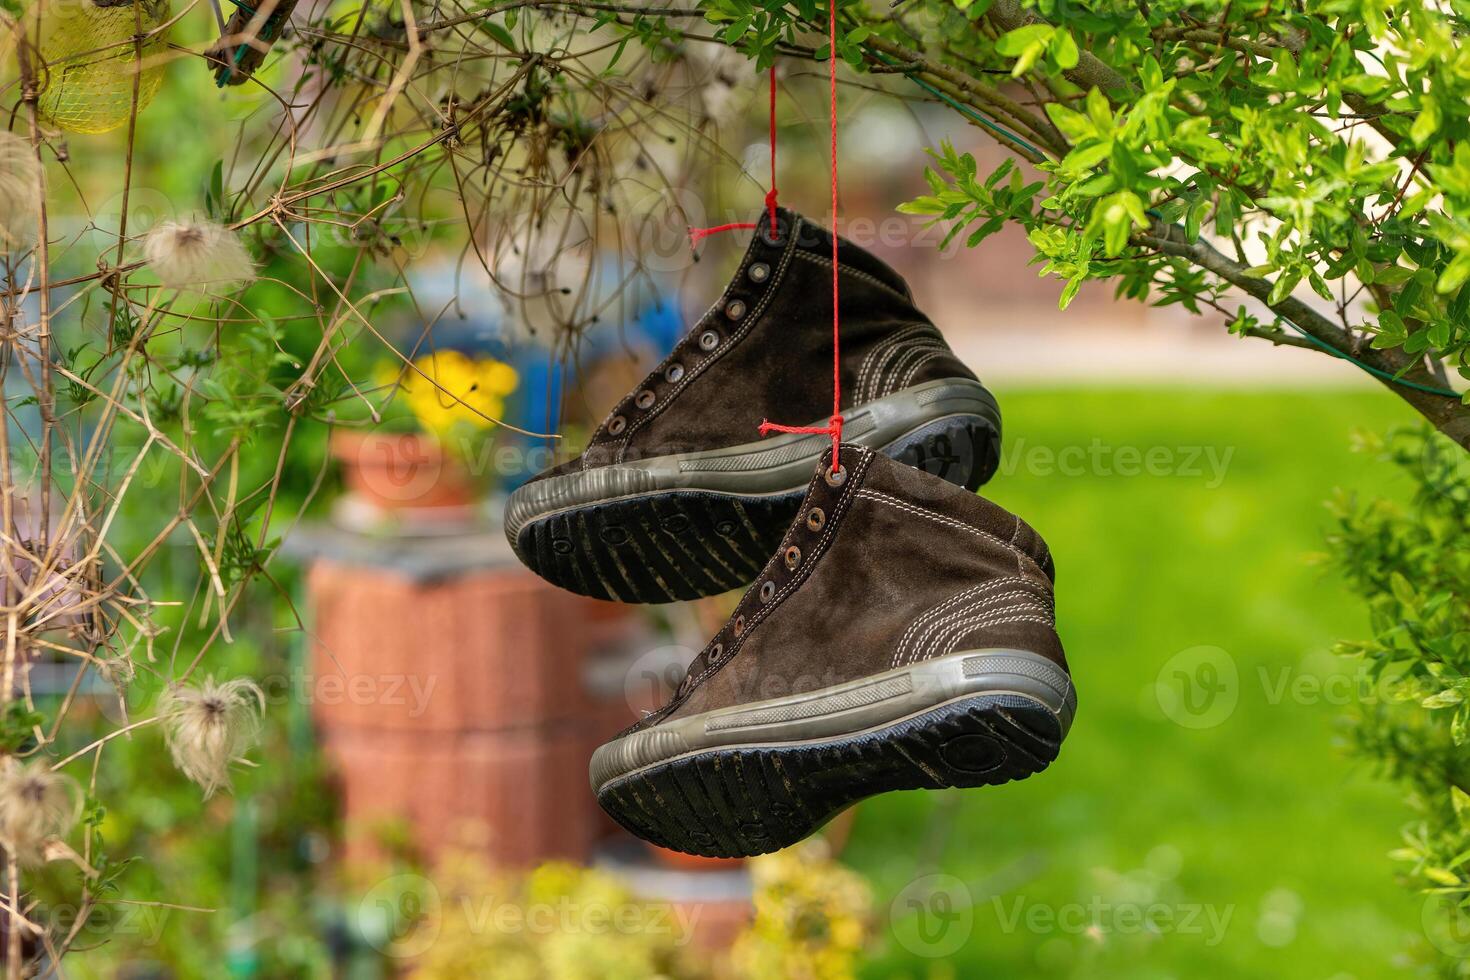 shoes hanging in a garden in spring photo